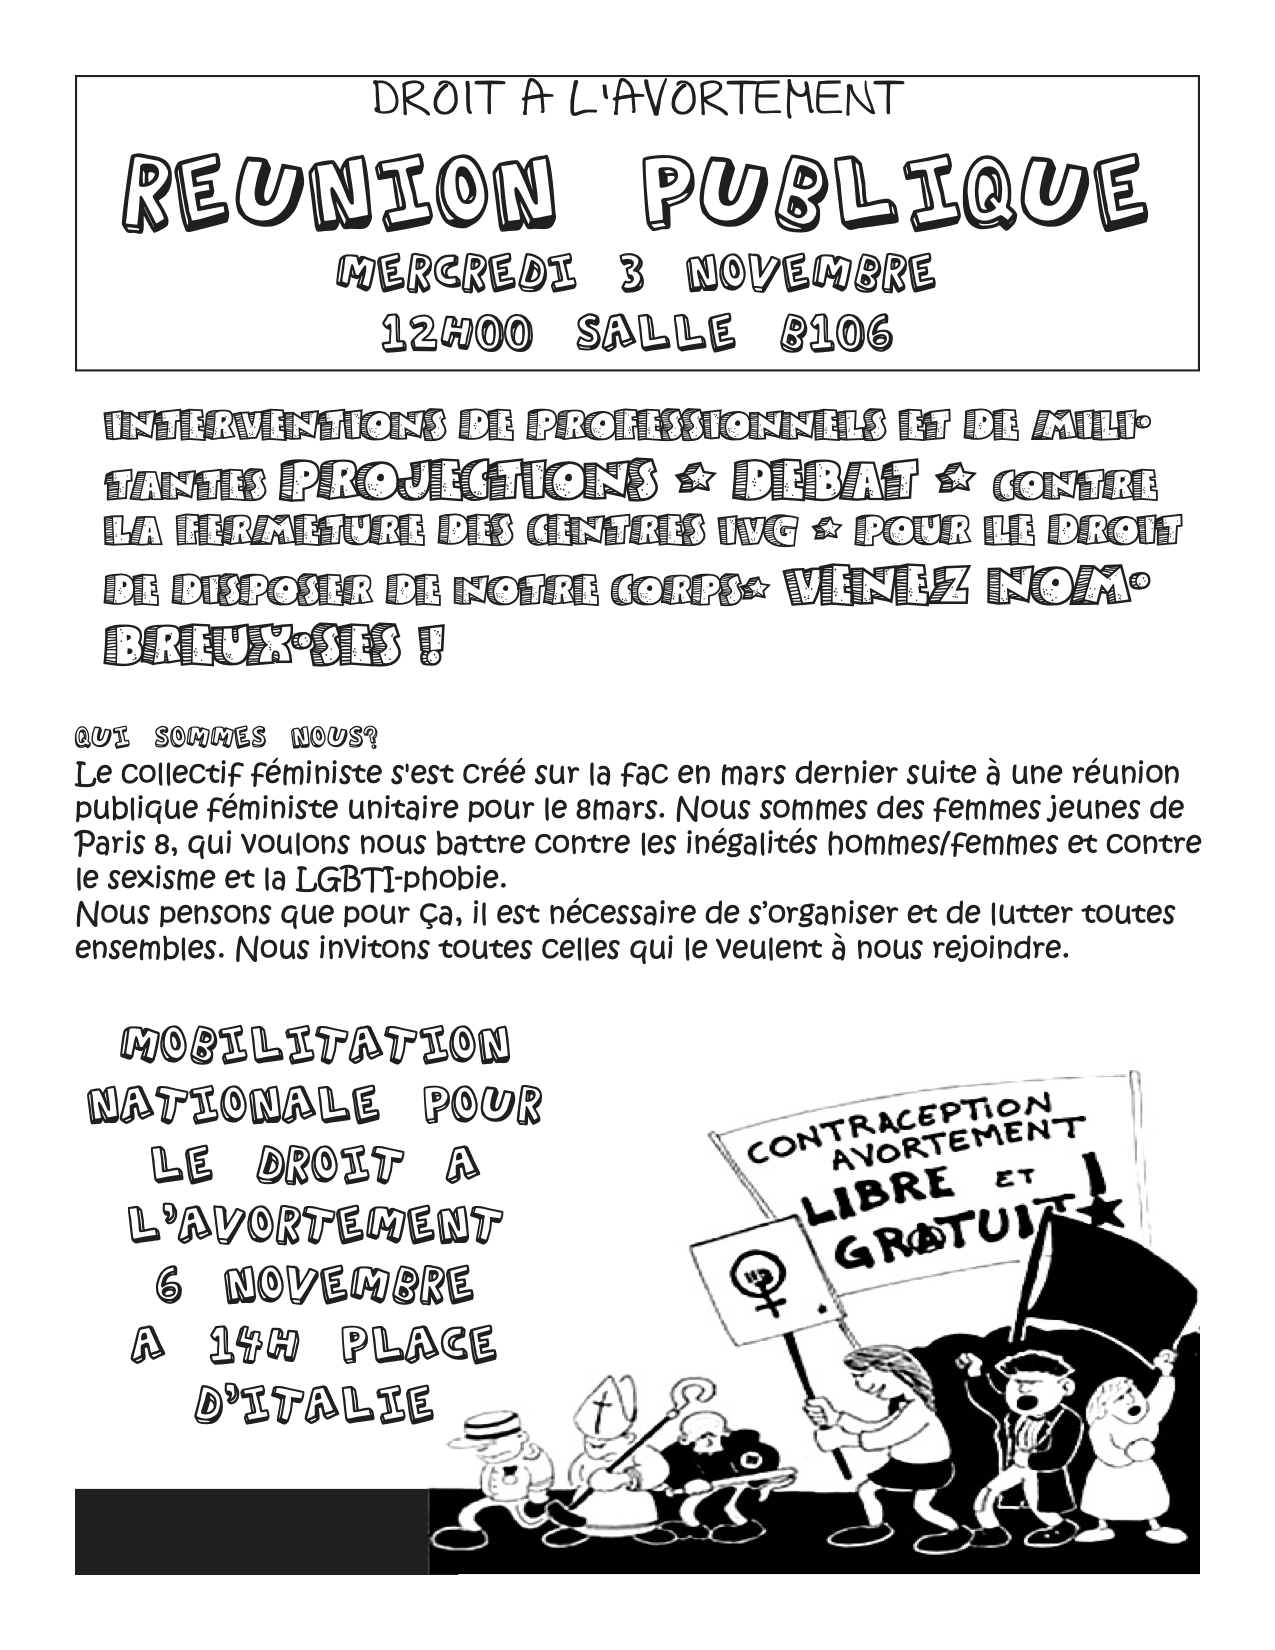 Figure 21: “We are young women from Paris 8 who want to fight against gender inequalities and against sexism and LGBTI-phobia.” (Feminist collective tract in favor of abortion rights, October 2010.)